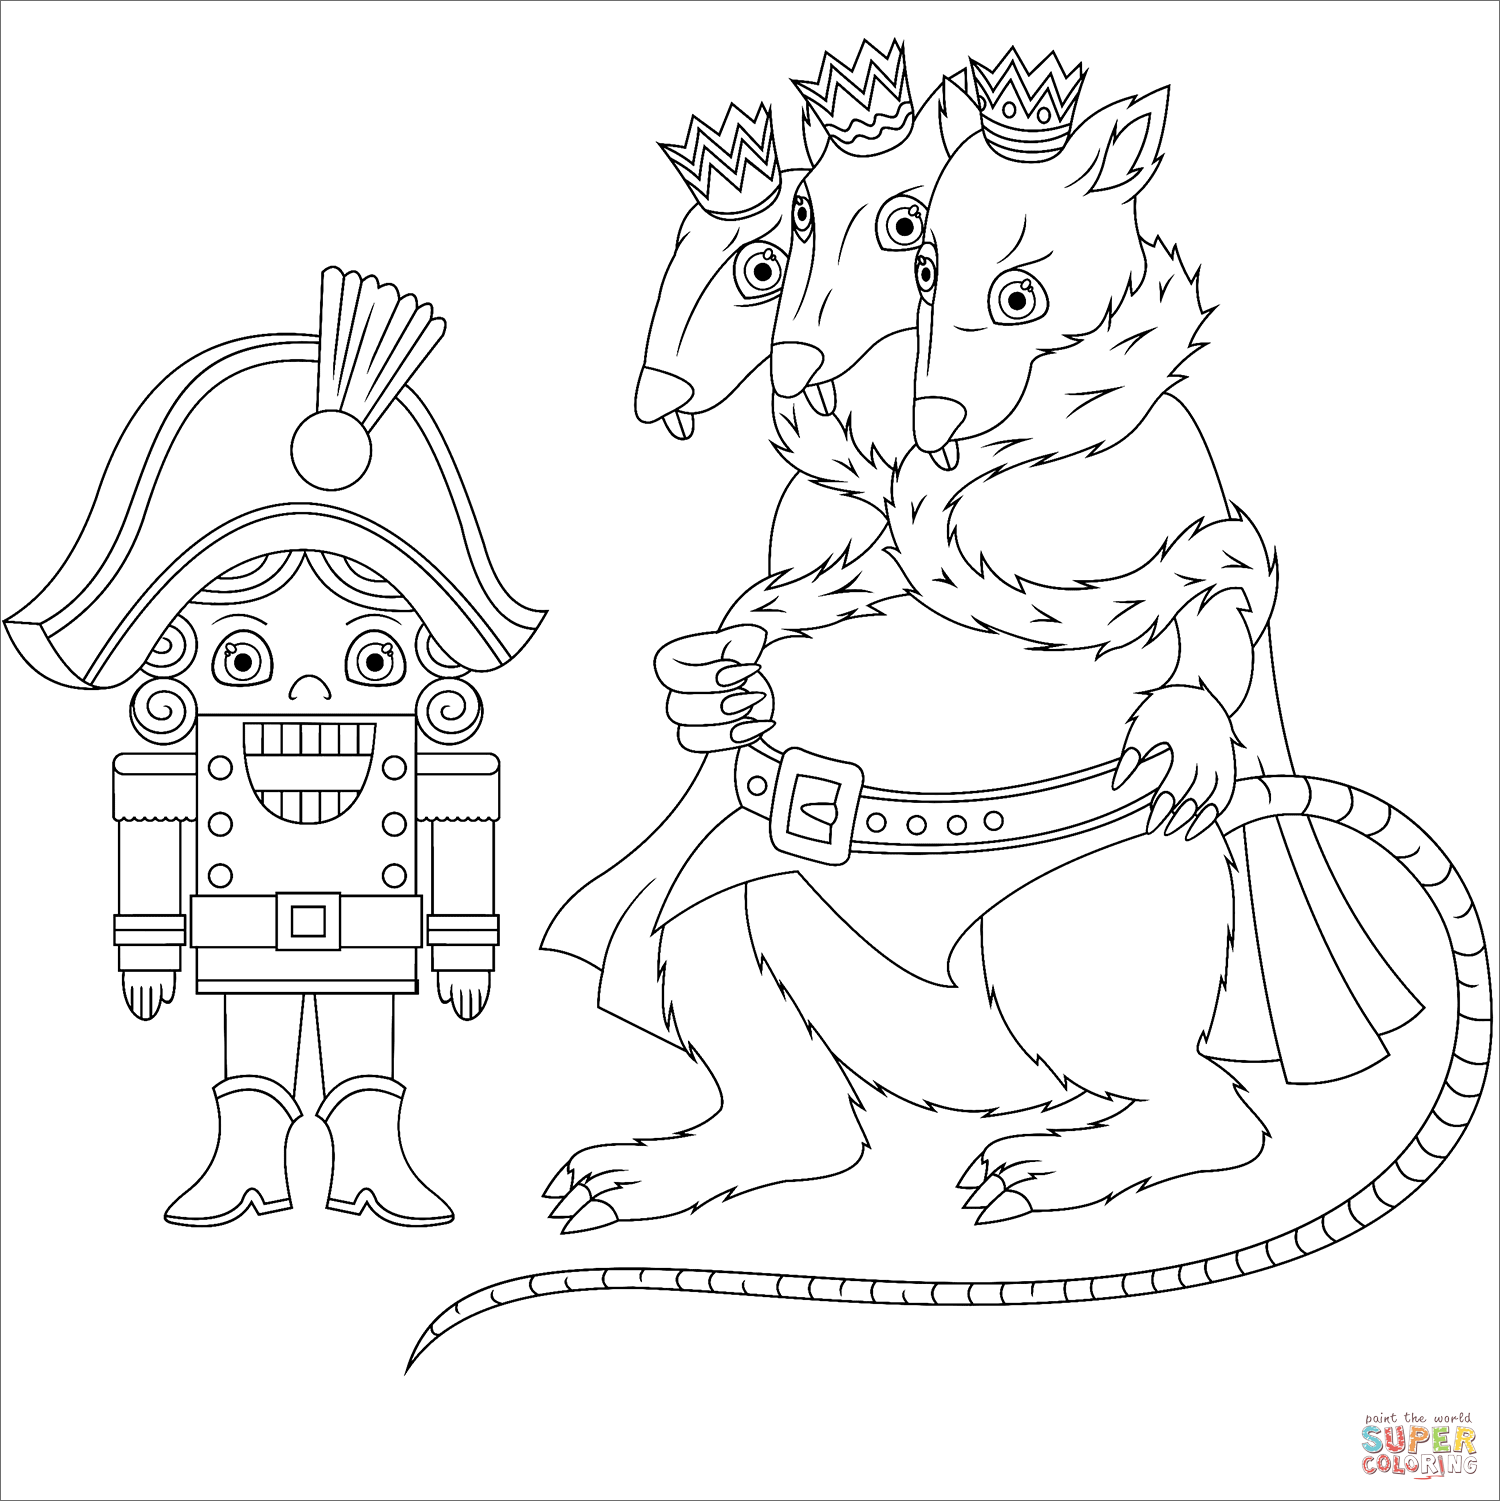 Nutcracker and king rat coloring page free printable coloring pages